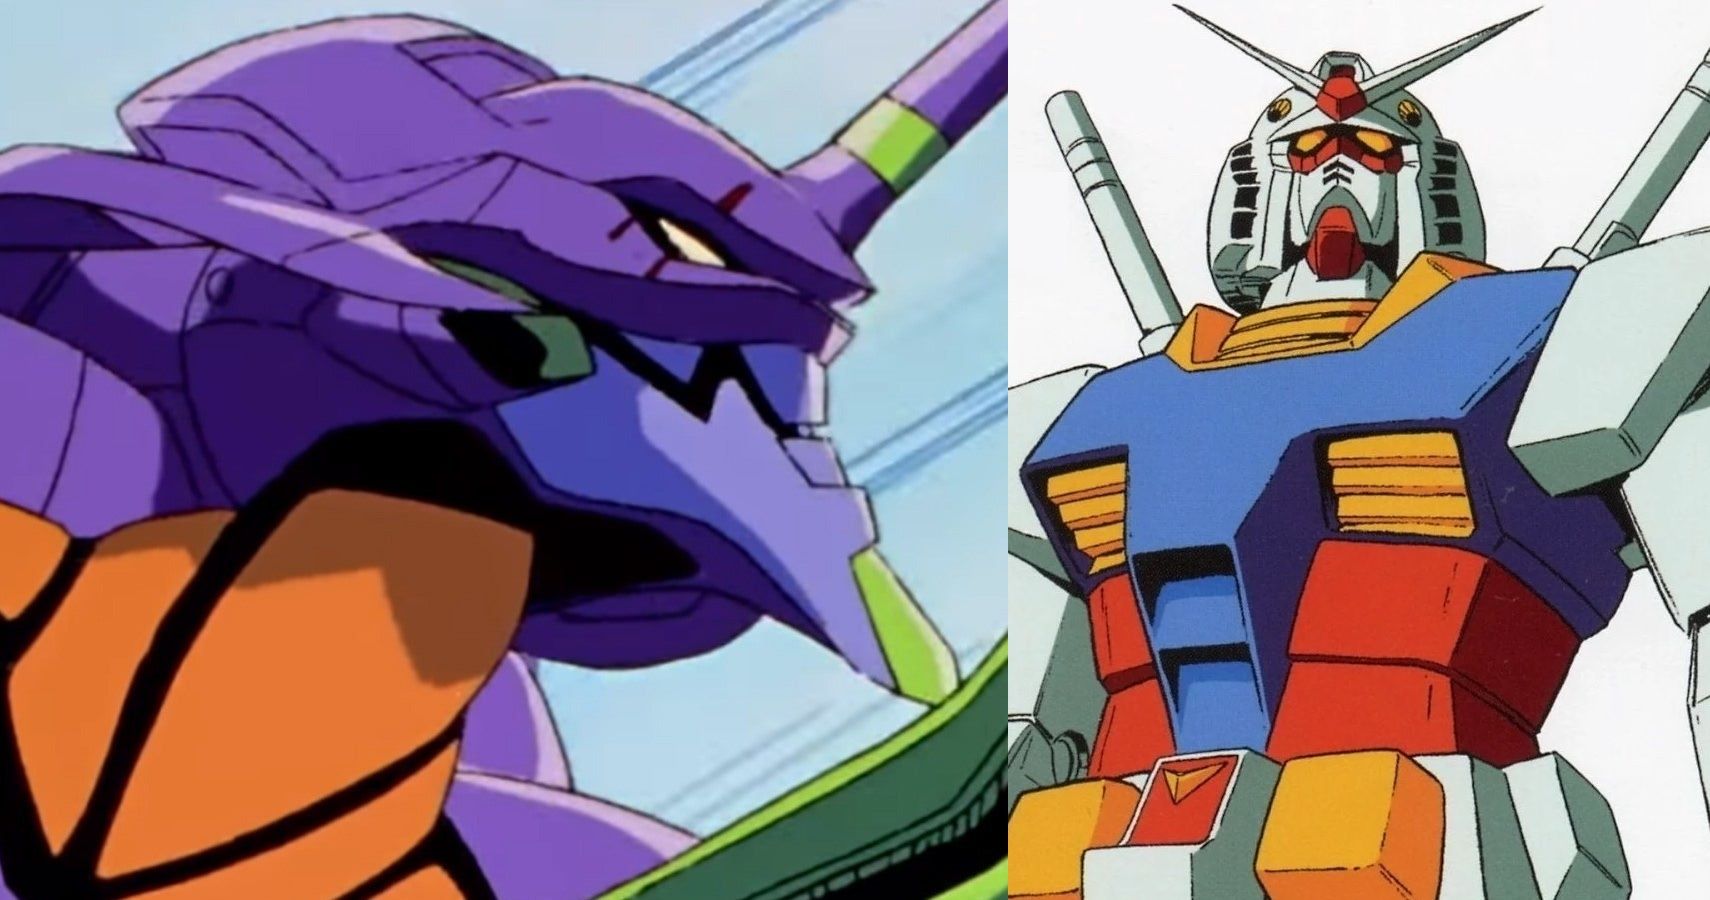 Gundam: 5 Mechs That Could Defeat The White Mobile Suit (& 5 That Can't)